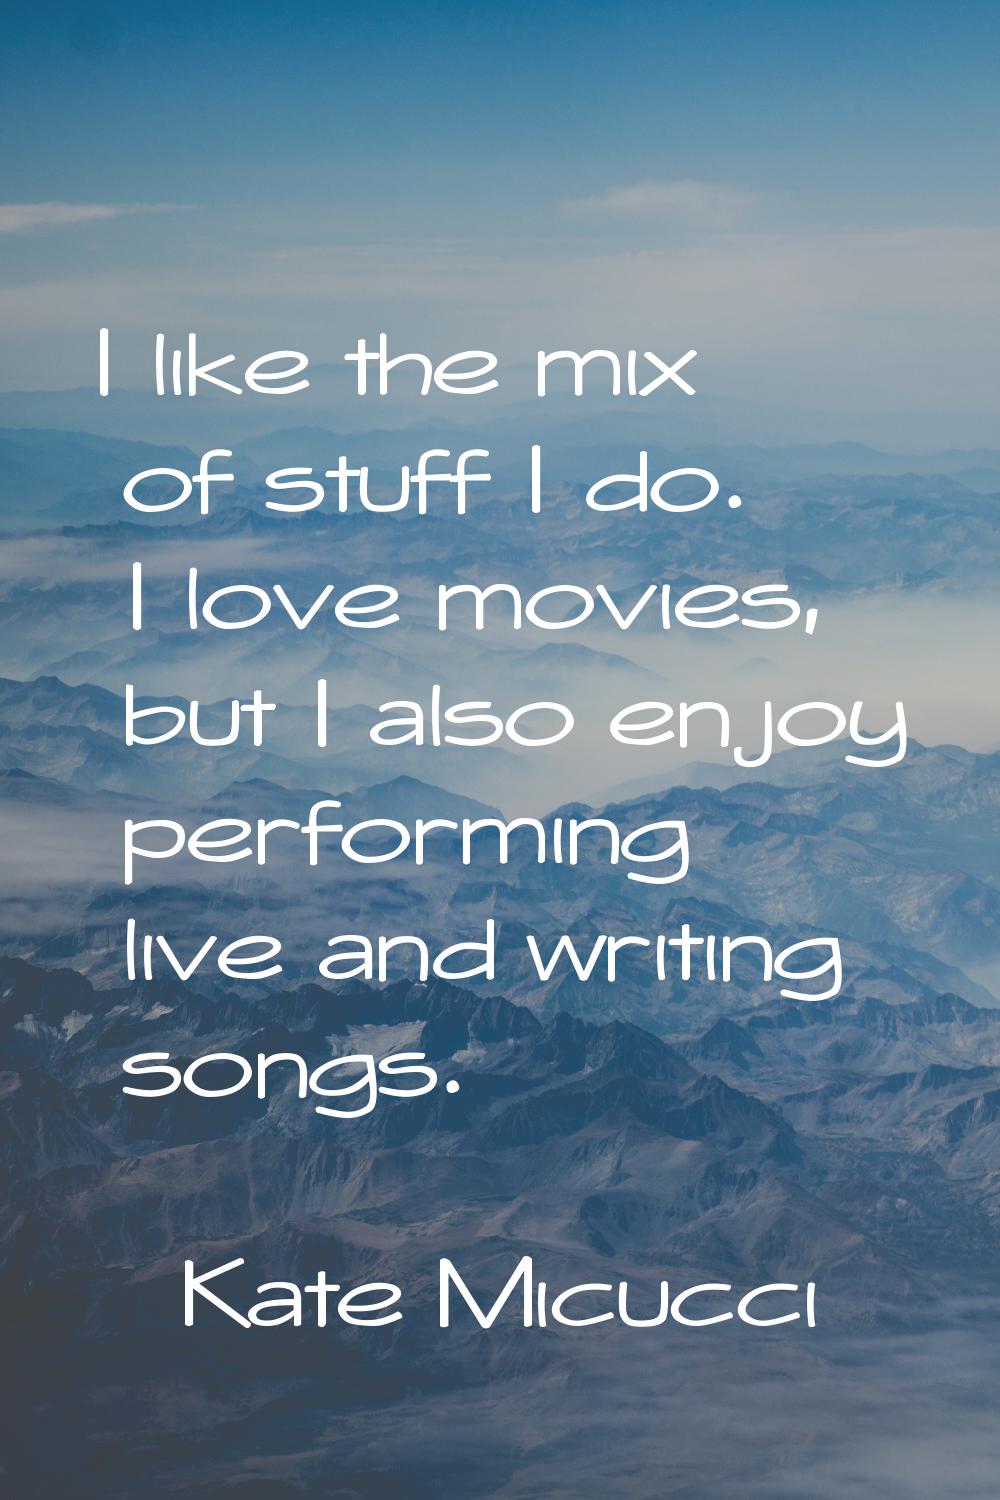 I like the mix of stuff I do. I love movies, but I also enjoy performing live and writing songs.